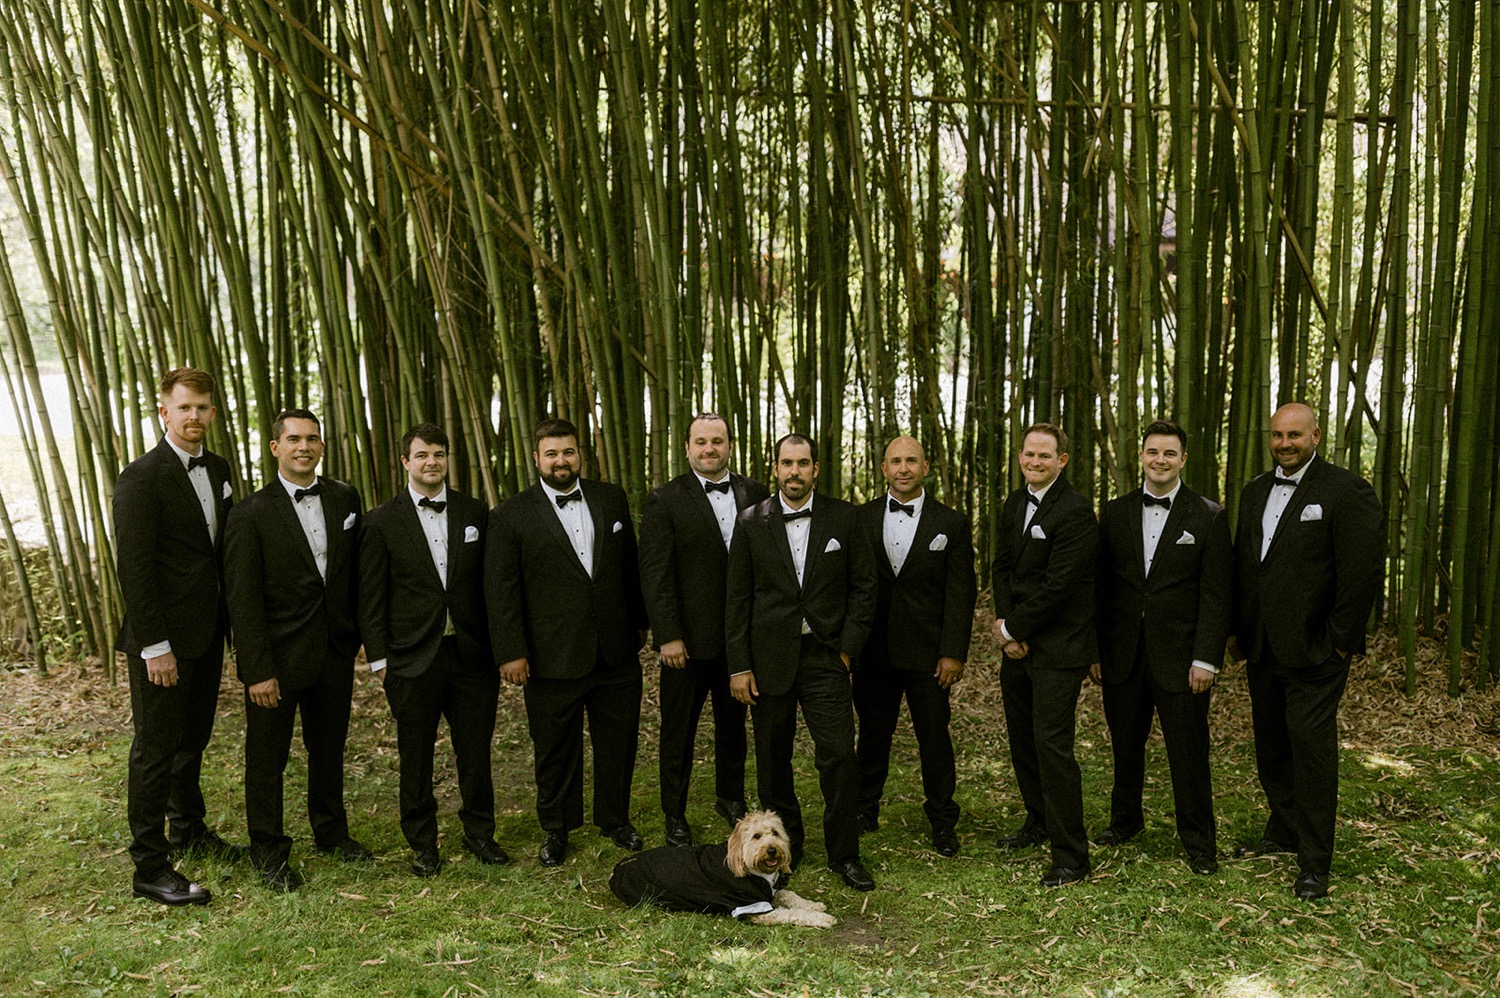 groomsmen photo with dog in front of bamboo wall